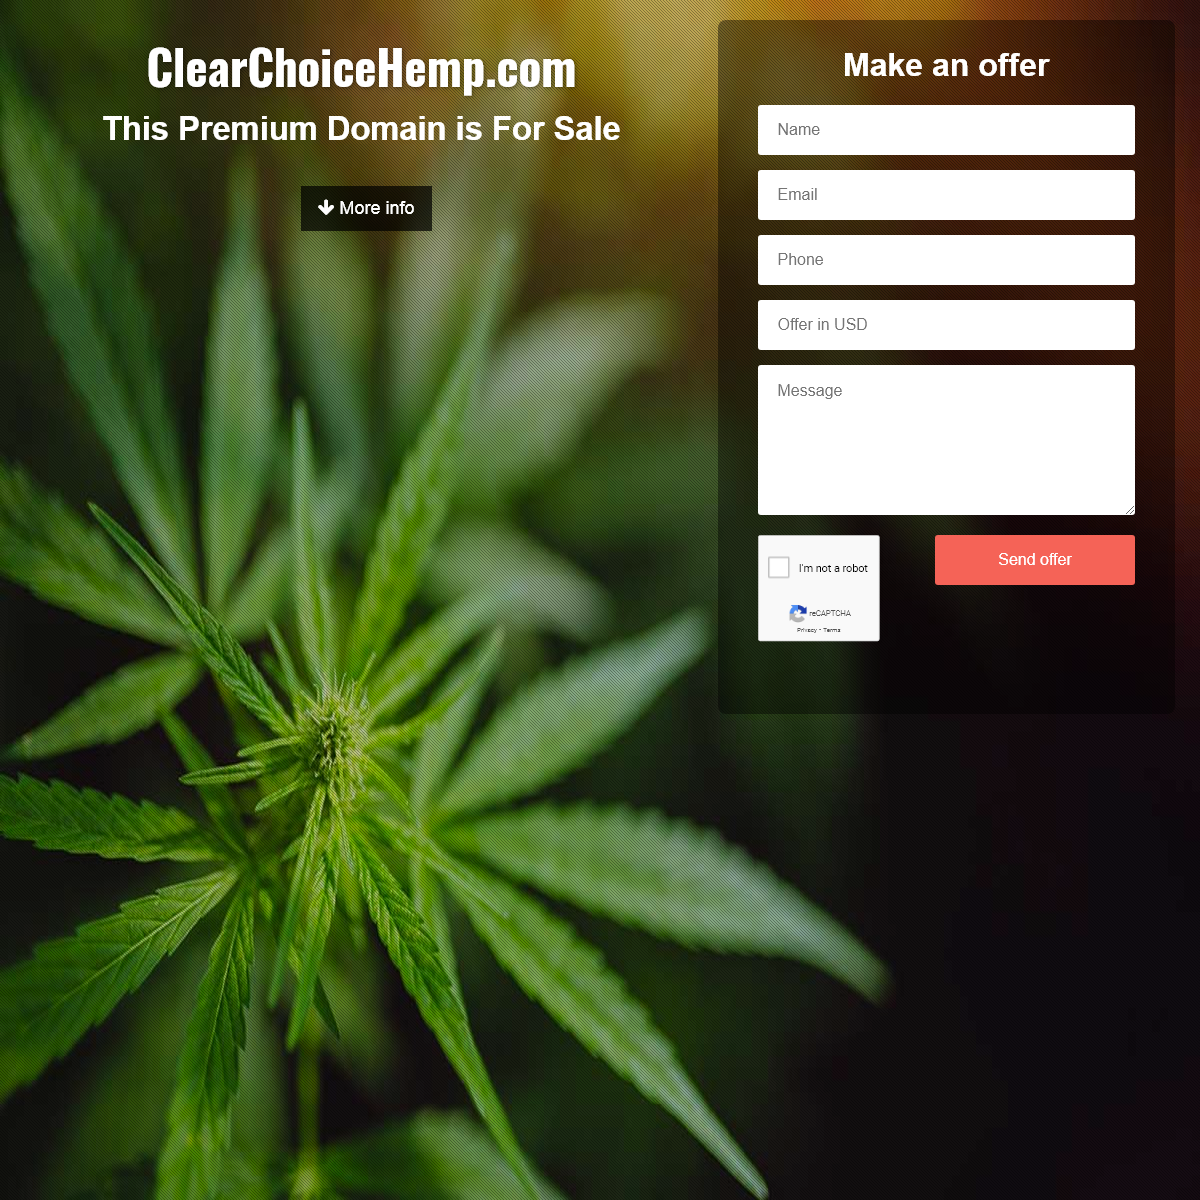 A complete backup of clearchoicehemp.com